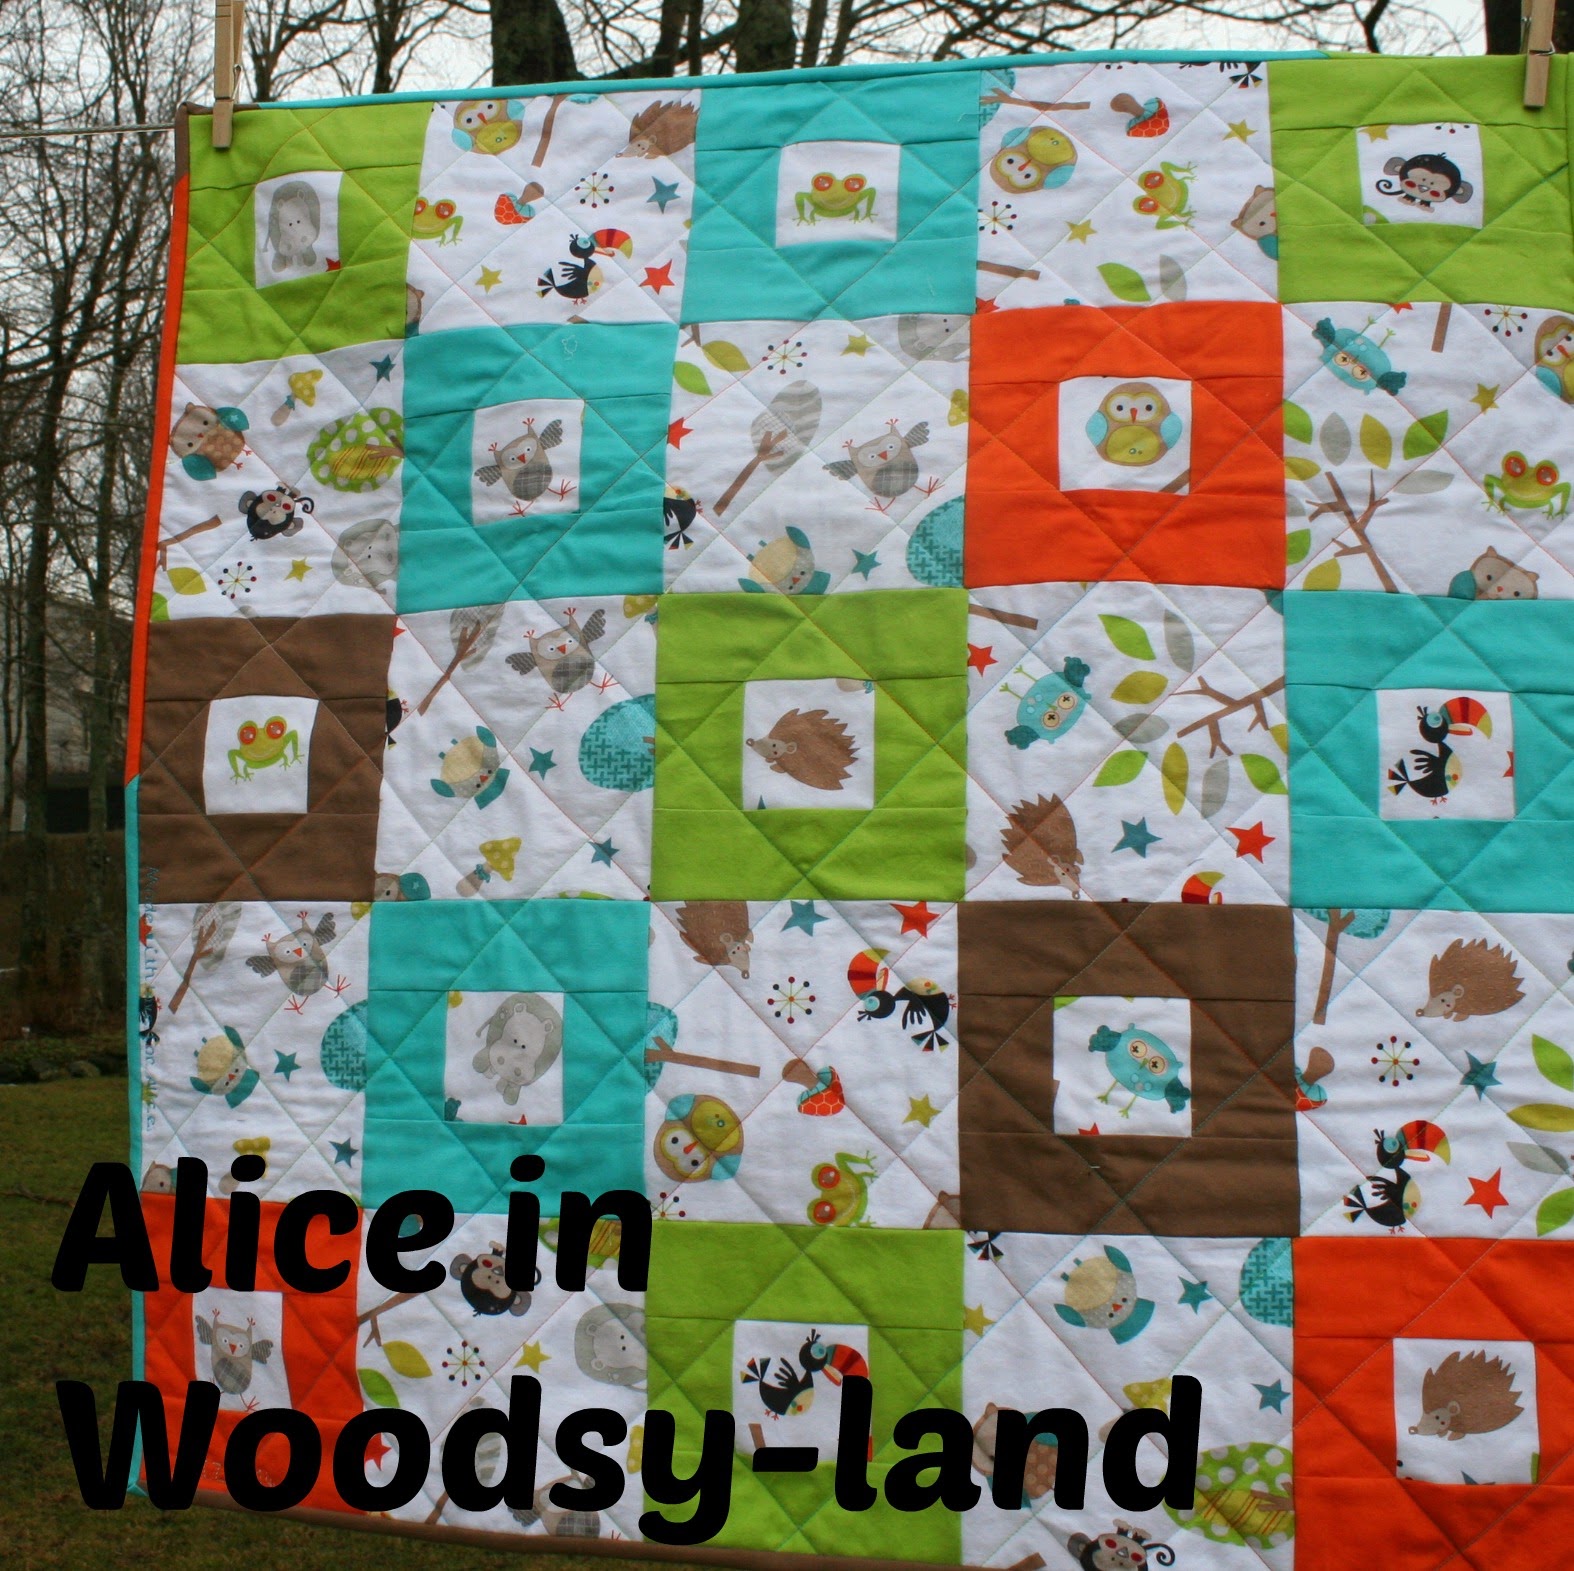 http://quarterinchfromtheedge.blogspot.ca/2014/01/finished-alice-in-woodsy-land.html